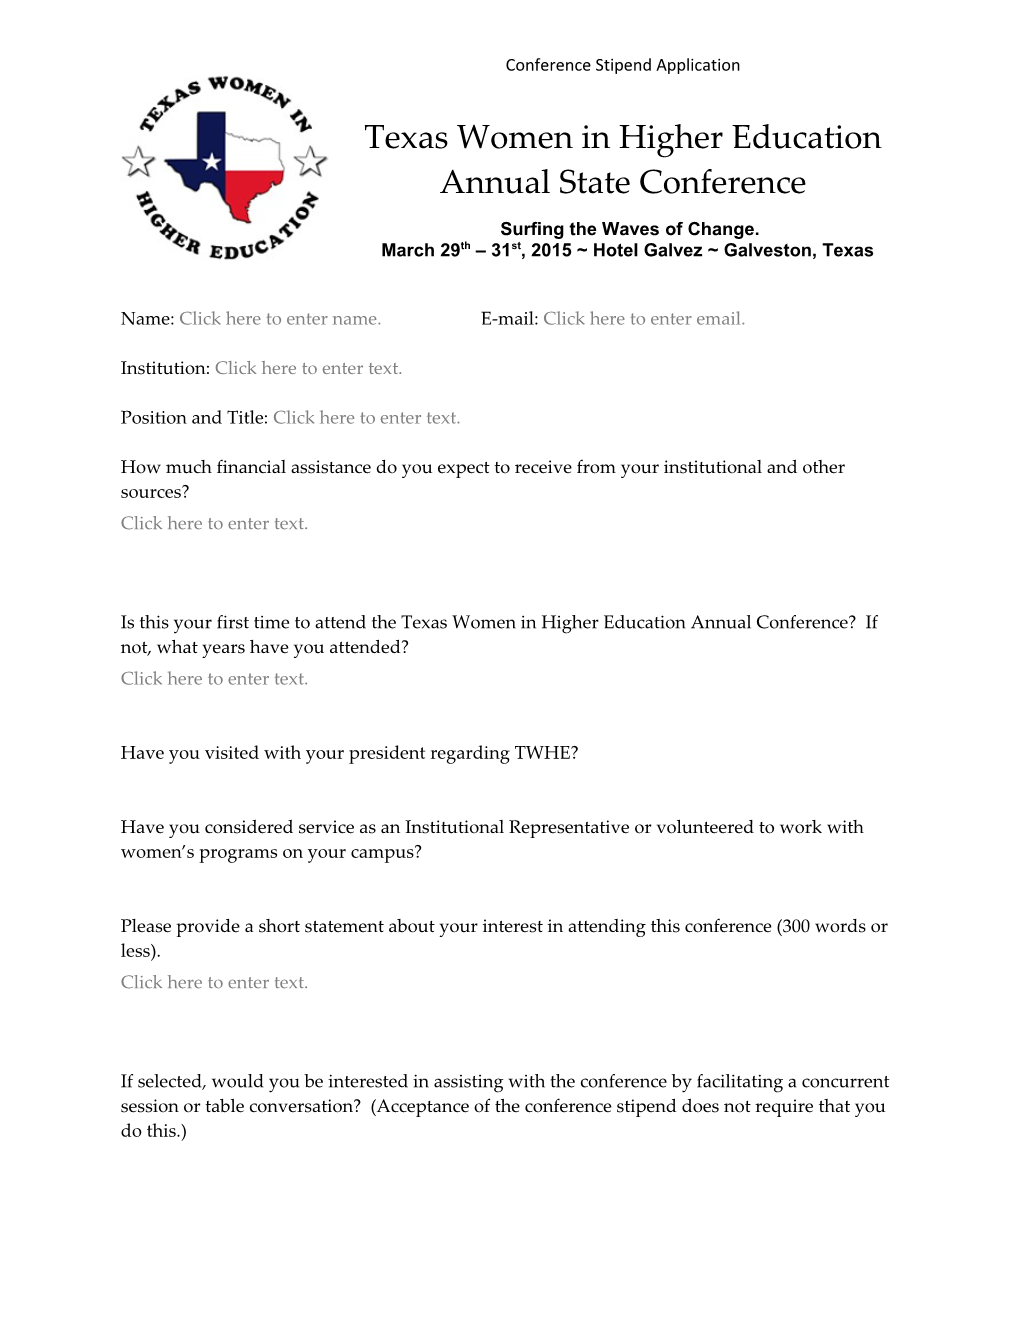 Texas Women in Higher Education Annual State Conference